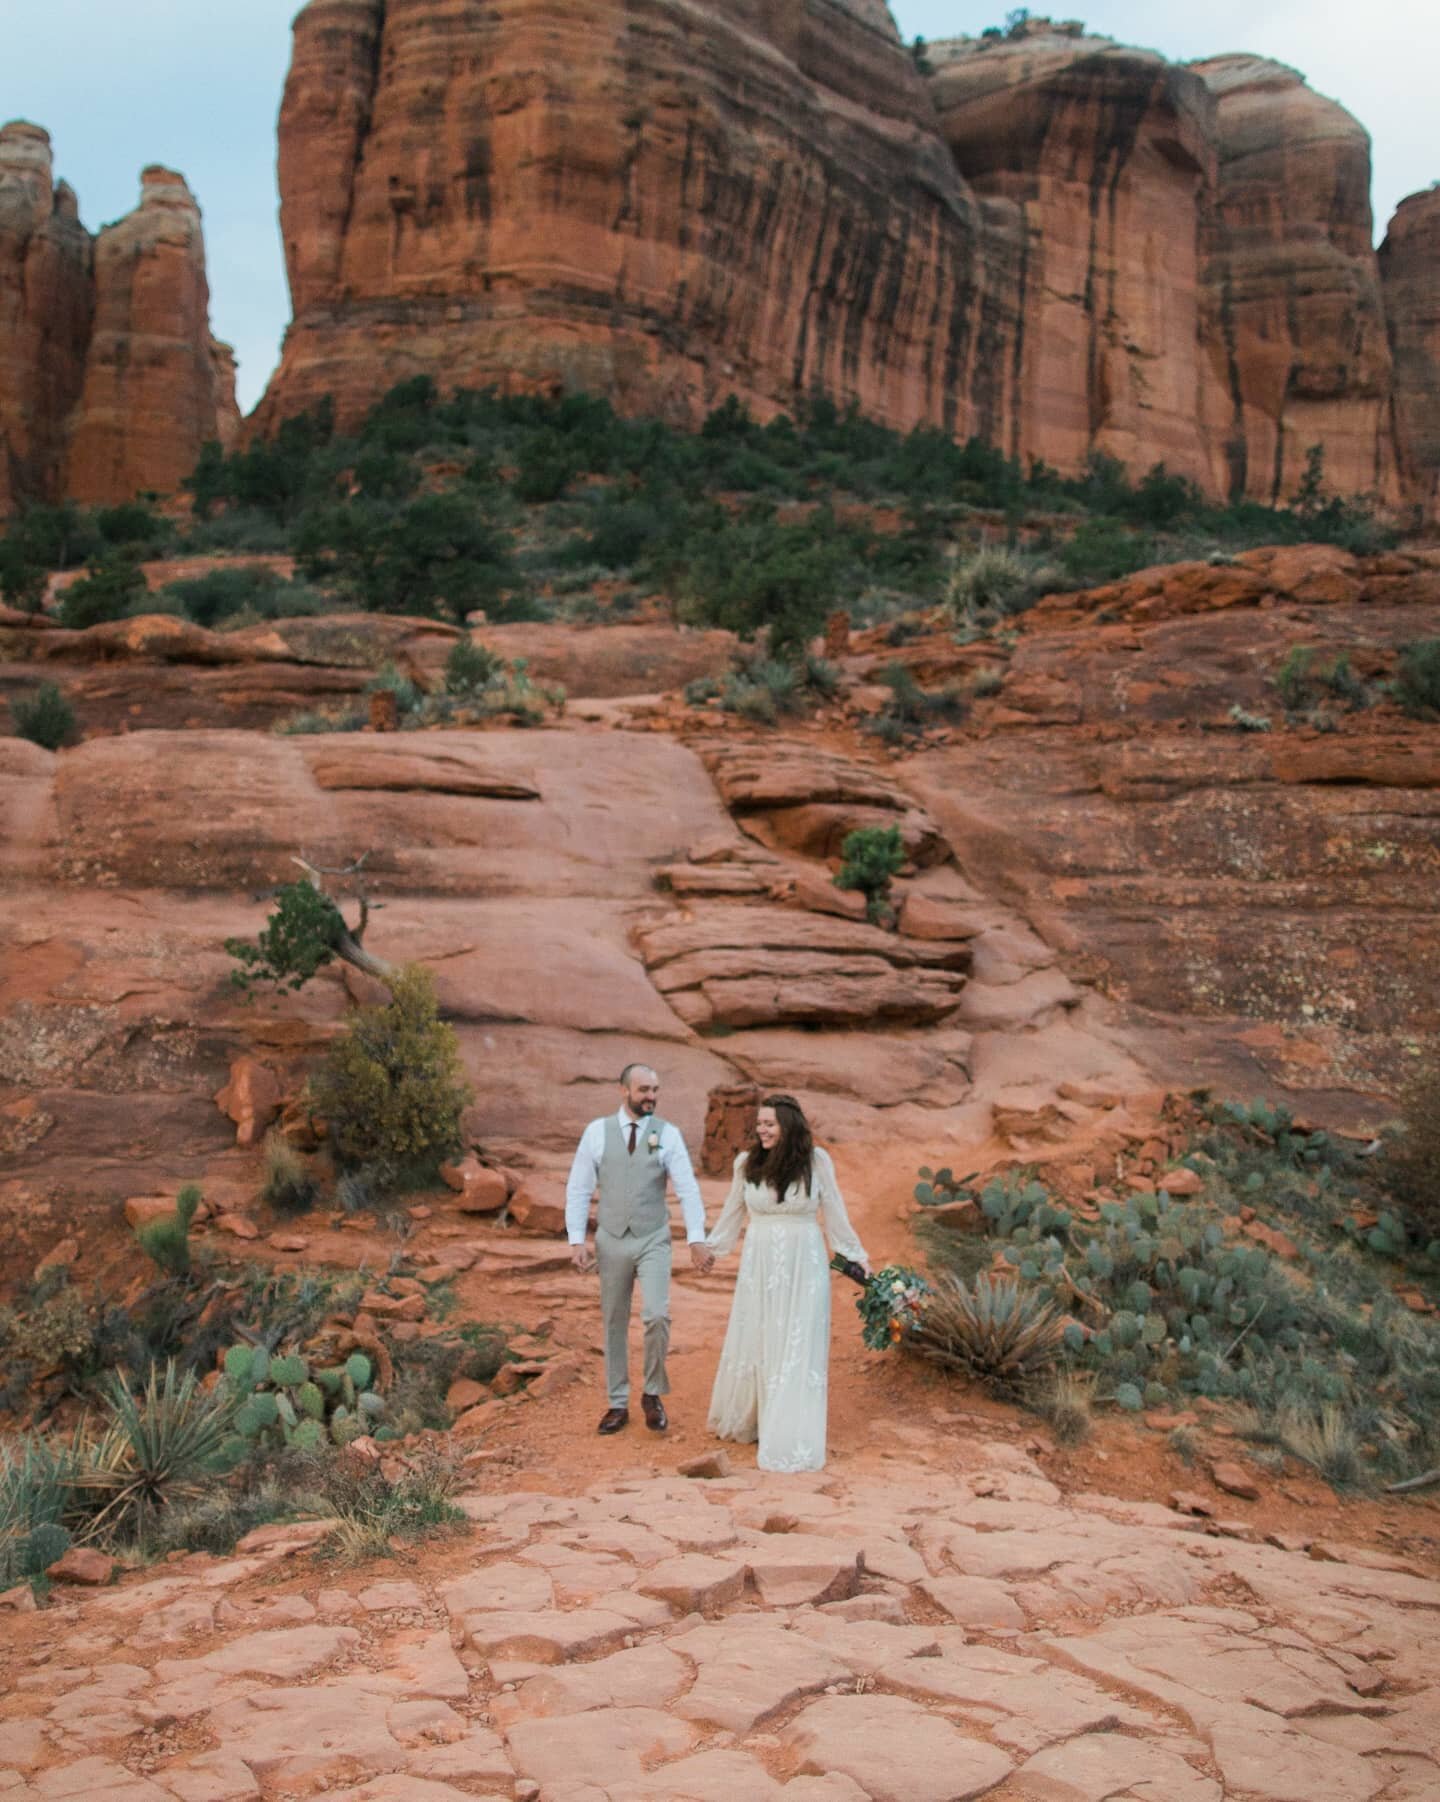 After a year of lockdown was able to ring in spring in Sedona, Arizona celebrating Abbey and Mark's wedding. Got to see two lovely people get married and go for a sunrise hike with them and the family!
#cathedralrock #sedona #arizona #wedding #hiking